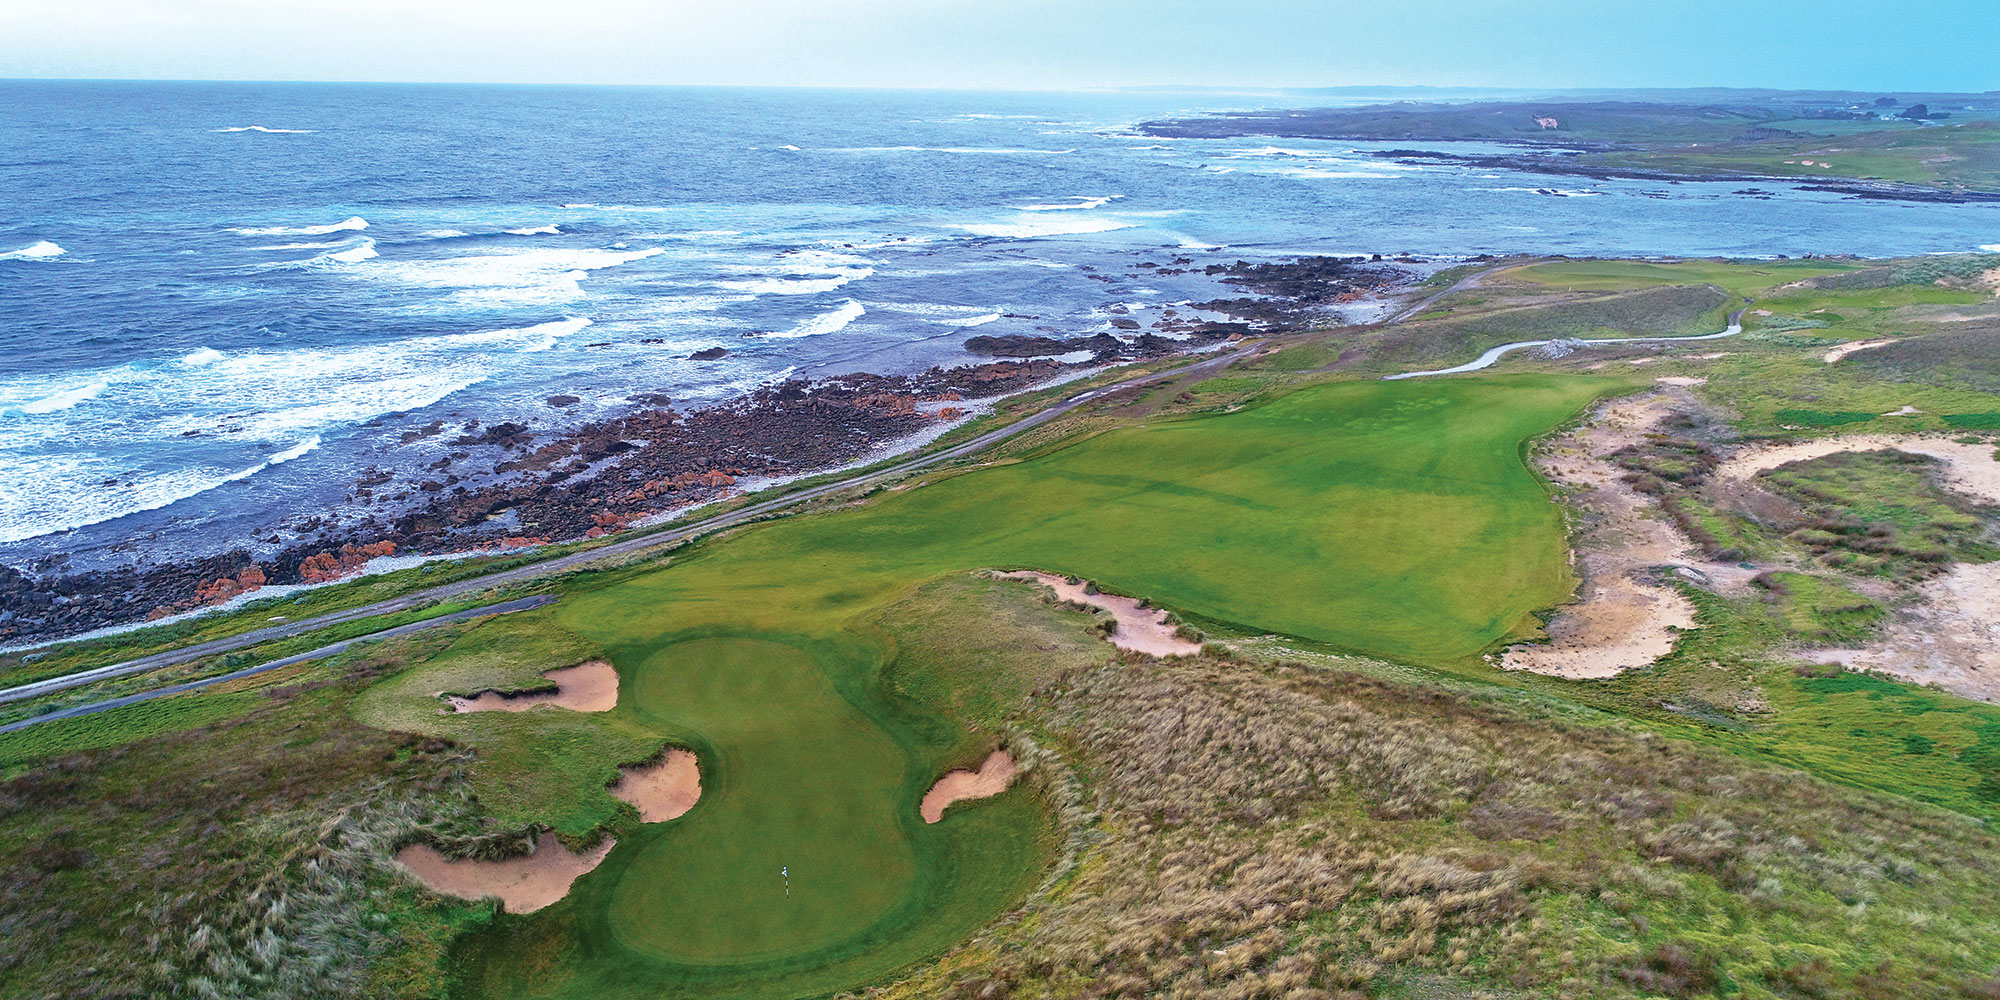 The second hole at Ocean Dunes features one of the most imaginative green complexes in the country.